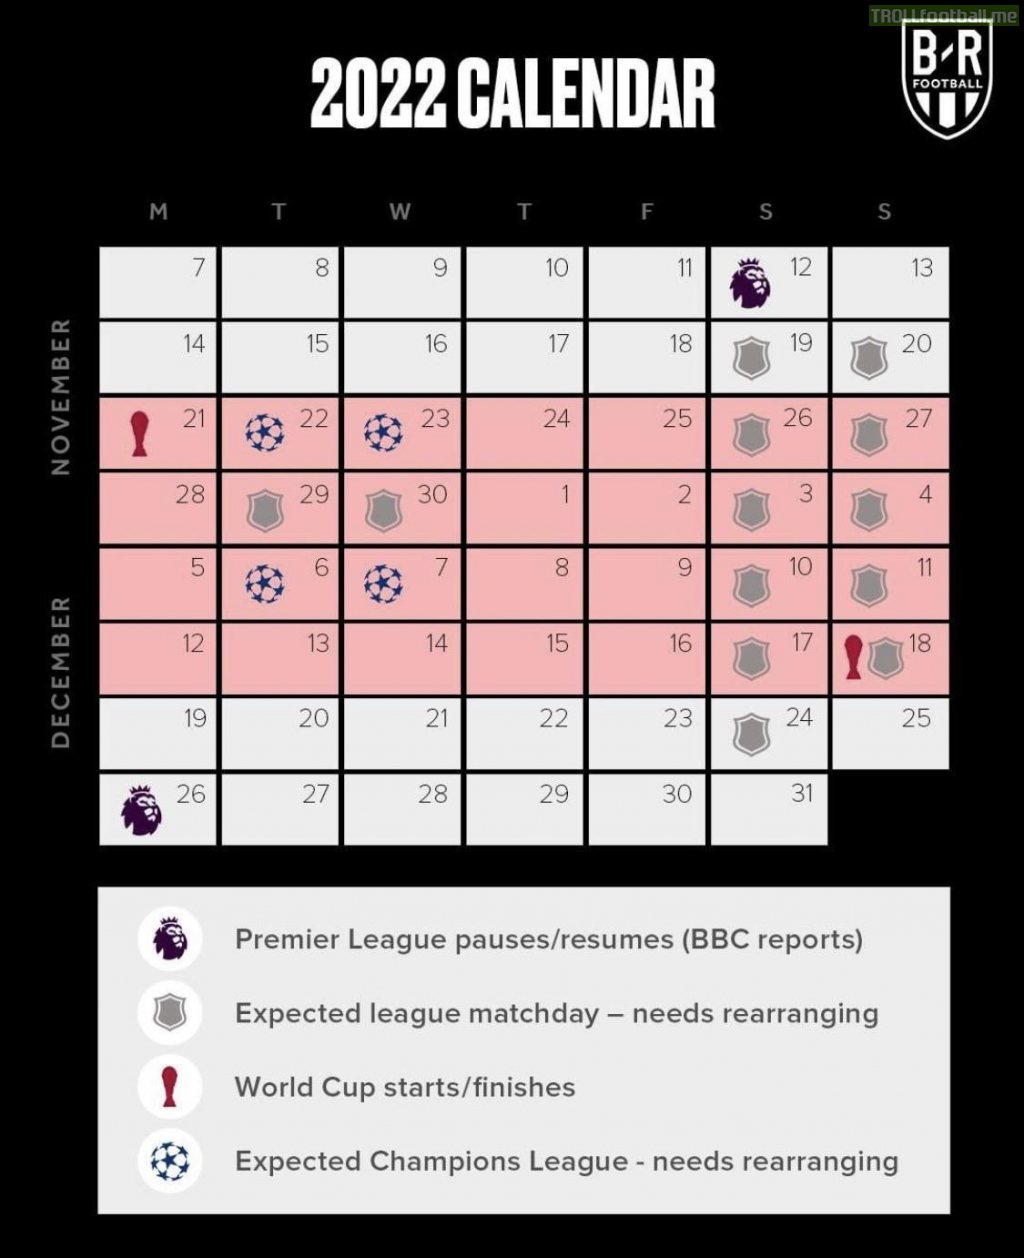 Possible Premier League and UCL games that may need rearranging during the 2022 WC